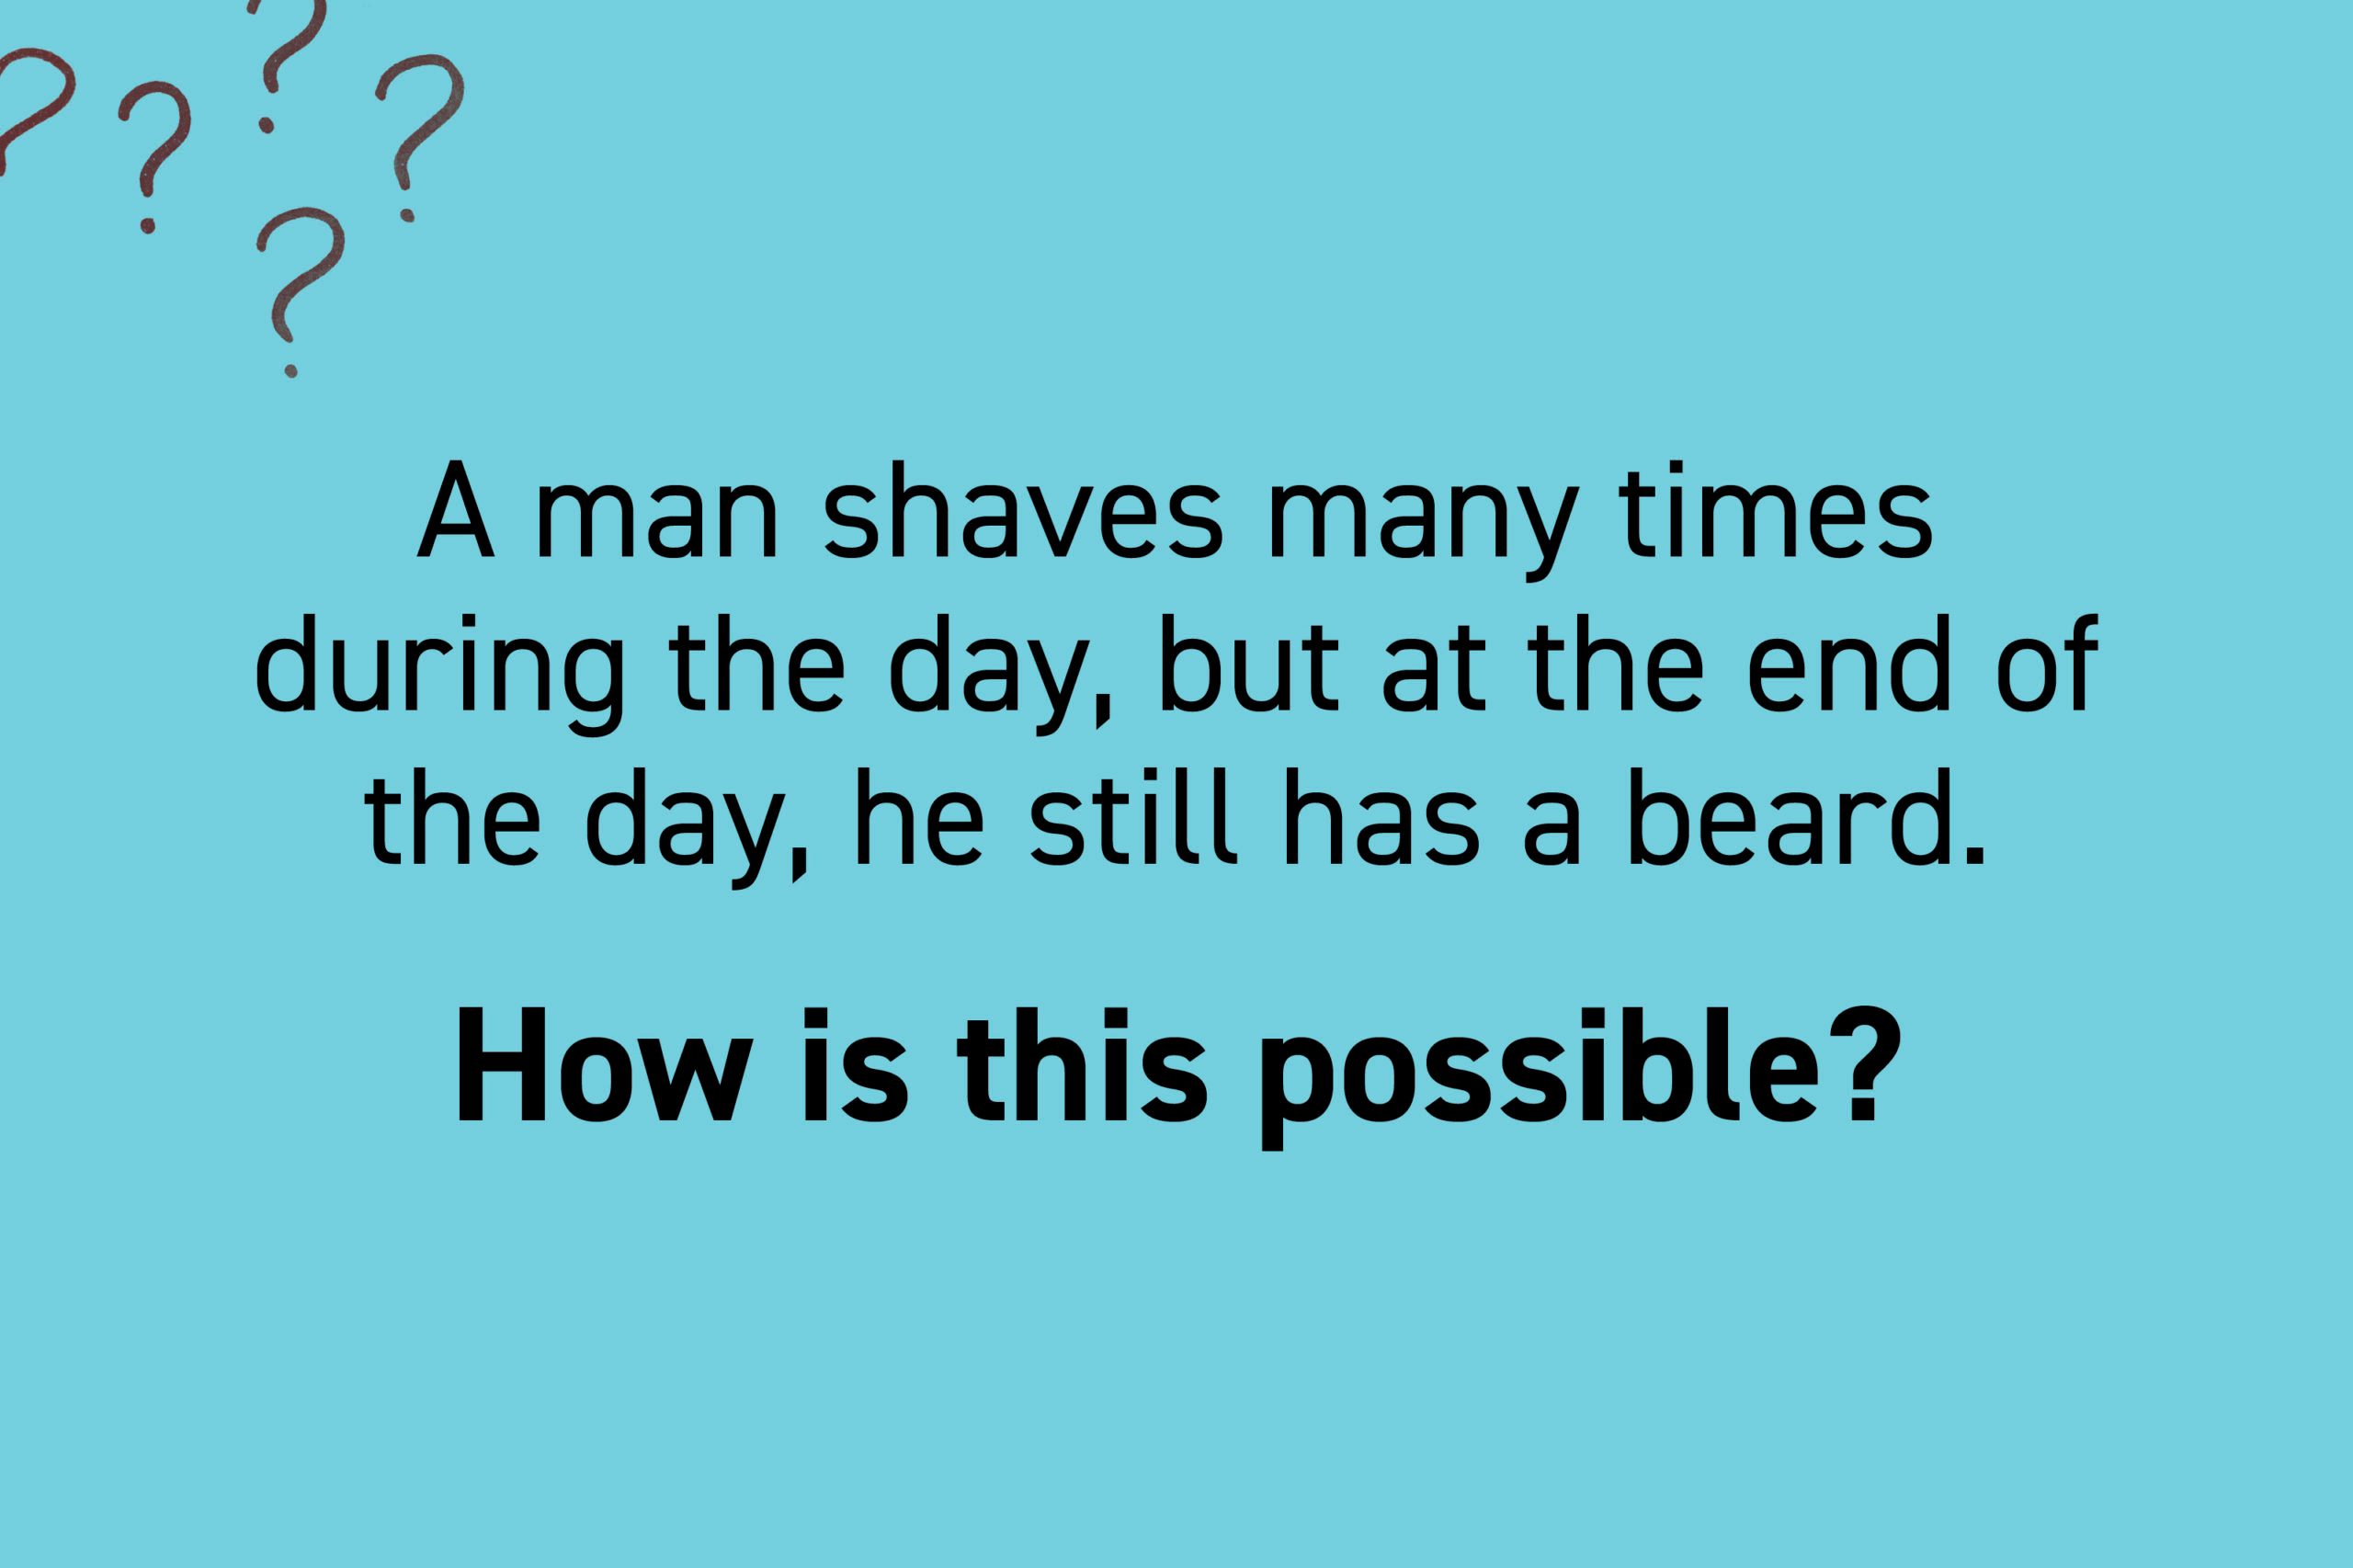 A man shaves many times during the day, but at the end of the day, he still has a beard. How is this possible?